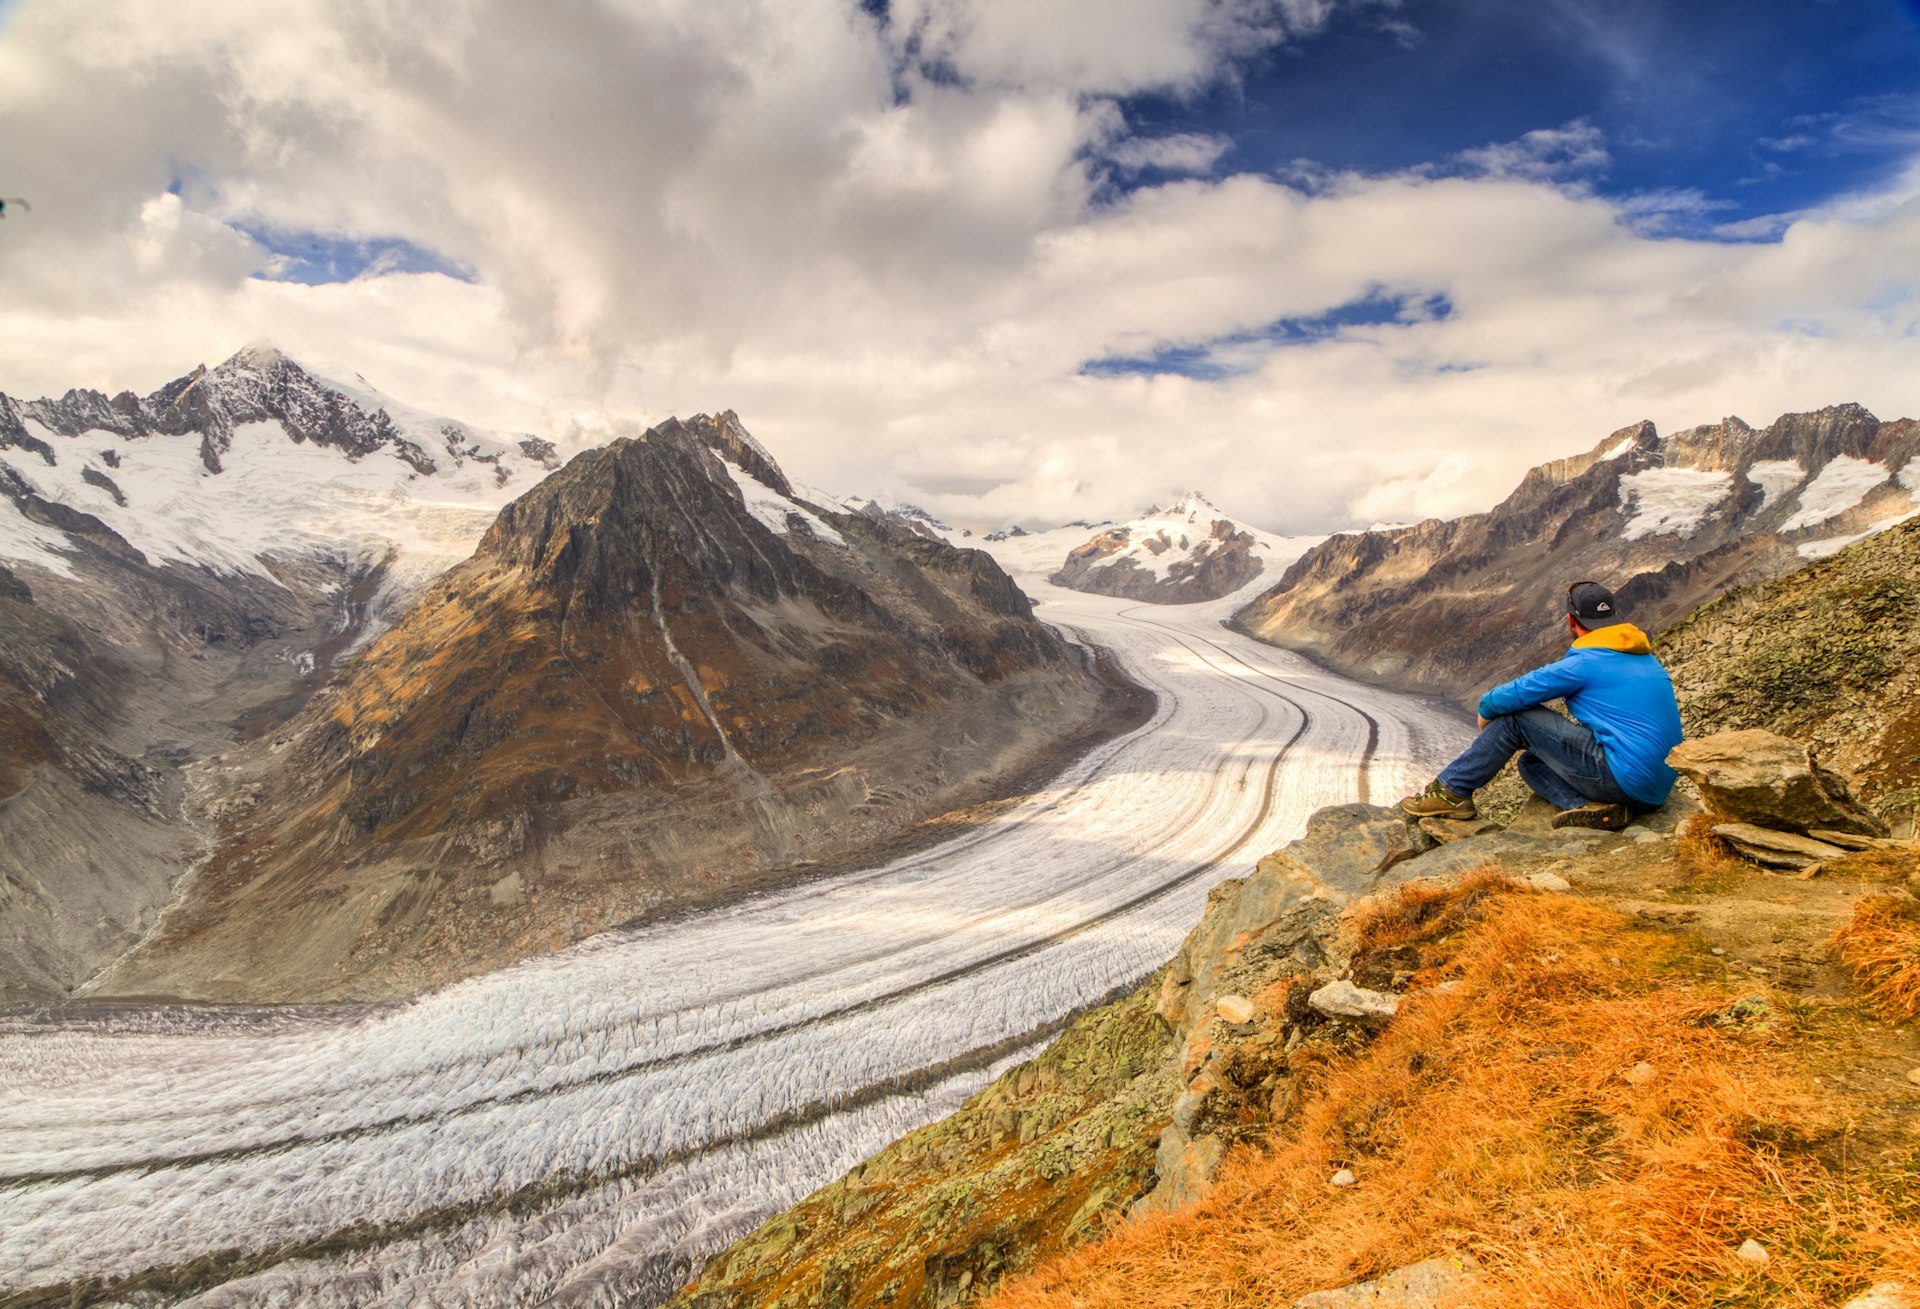 A hiker sits down and takes in the vast Aletsch Glacier as it snakes around the mountains in the Alps